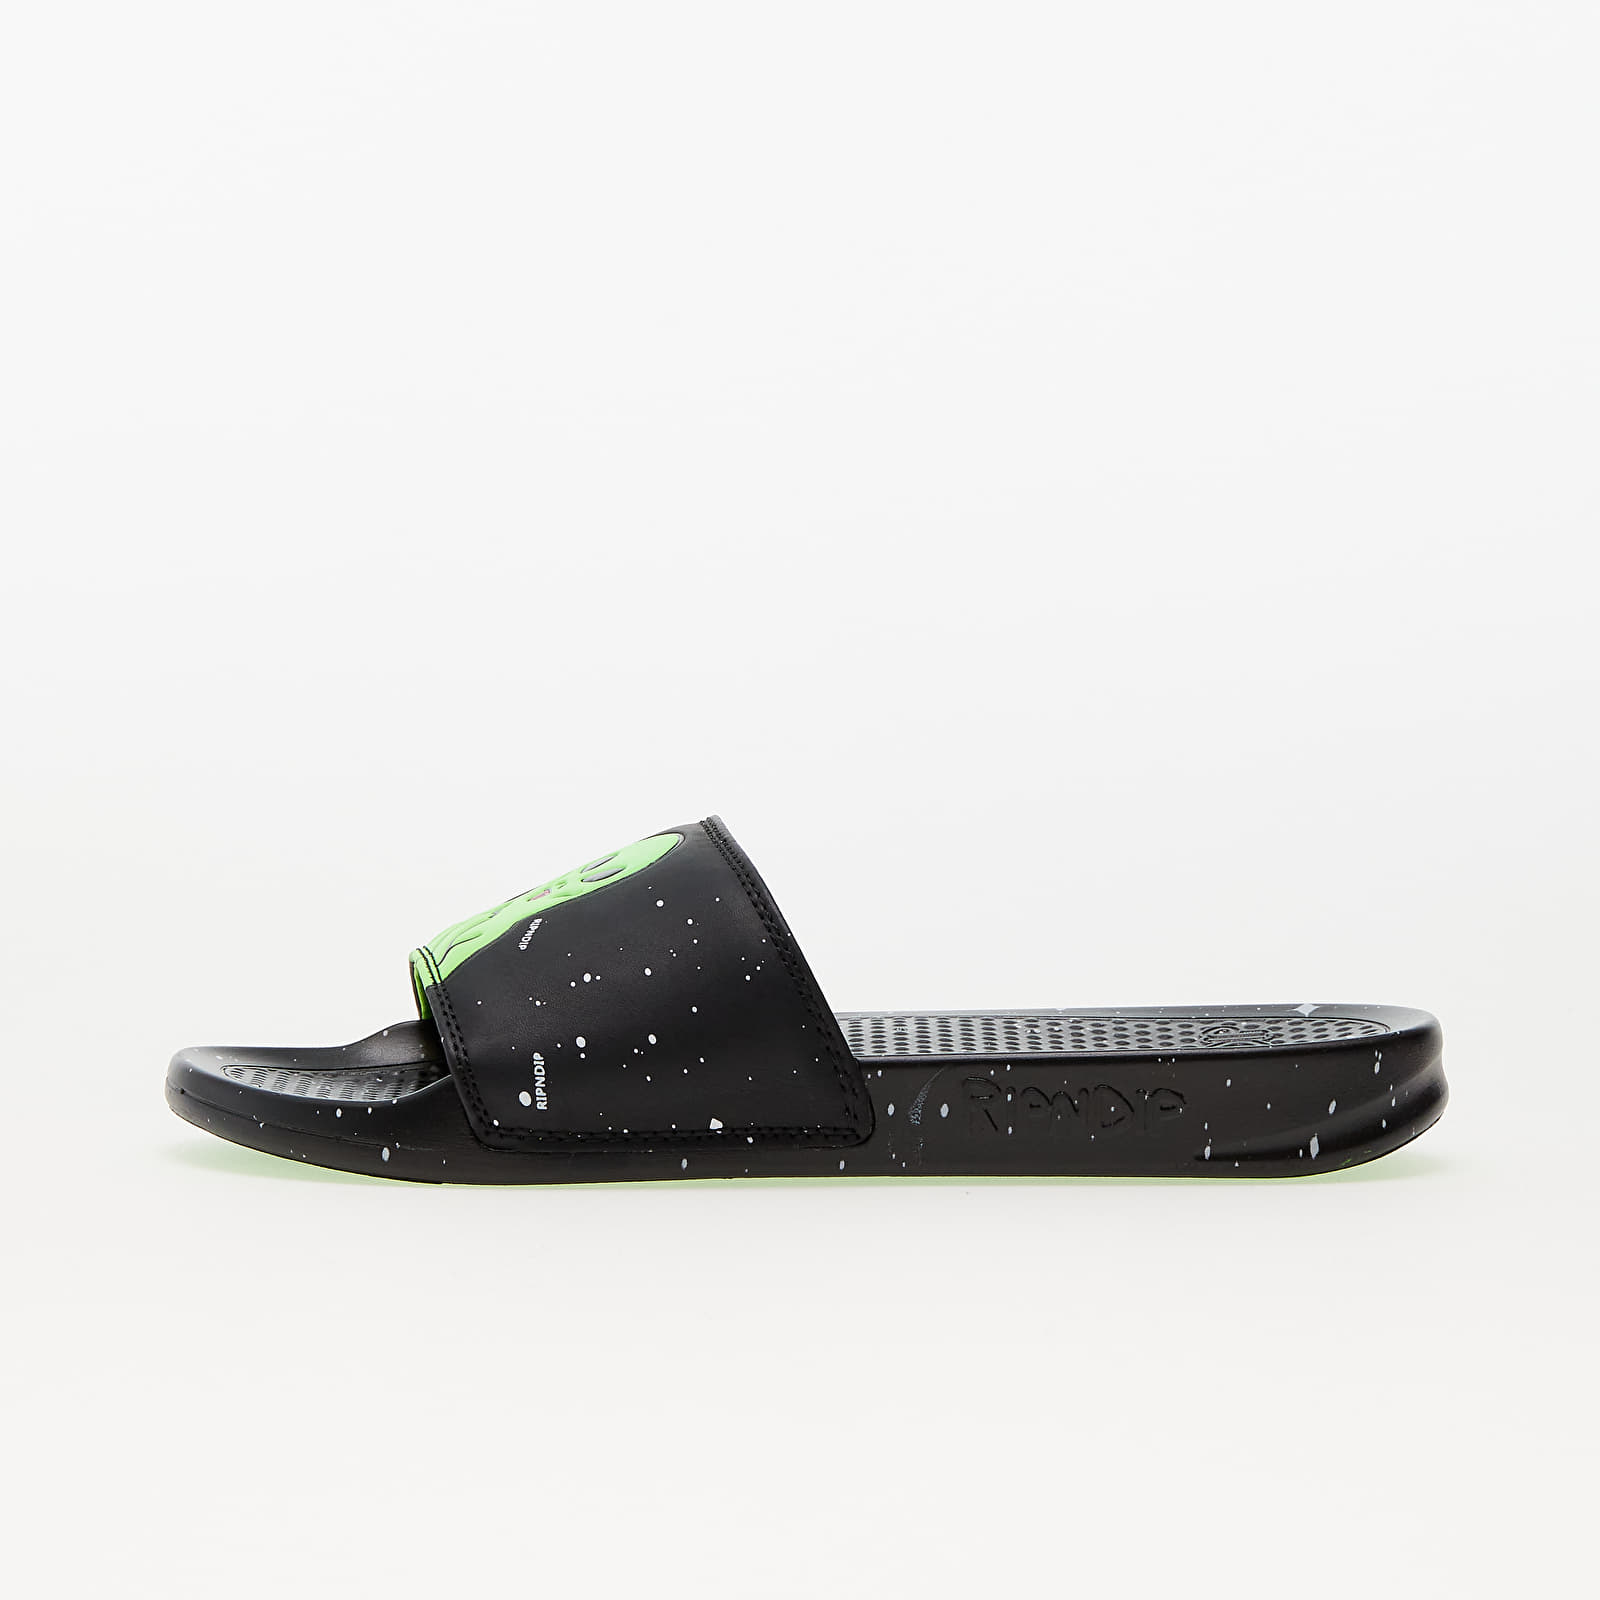 Men's shoes RIPNDIP We Out Here Slides Black & Neon Green